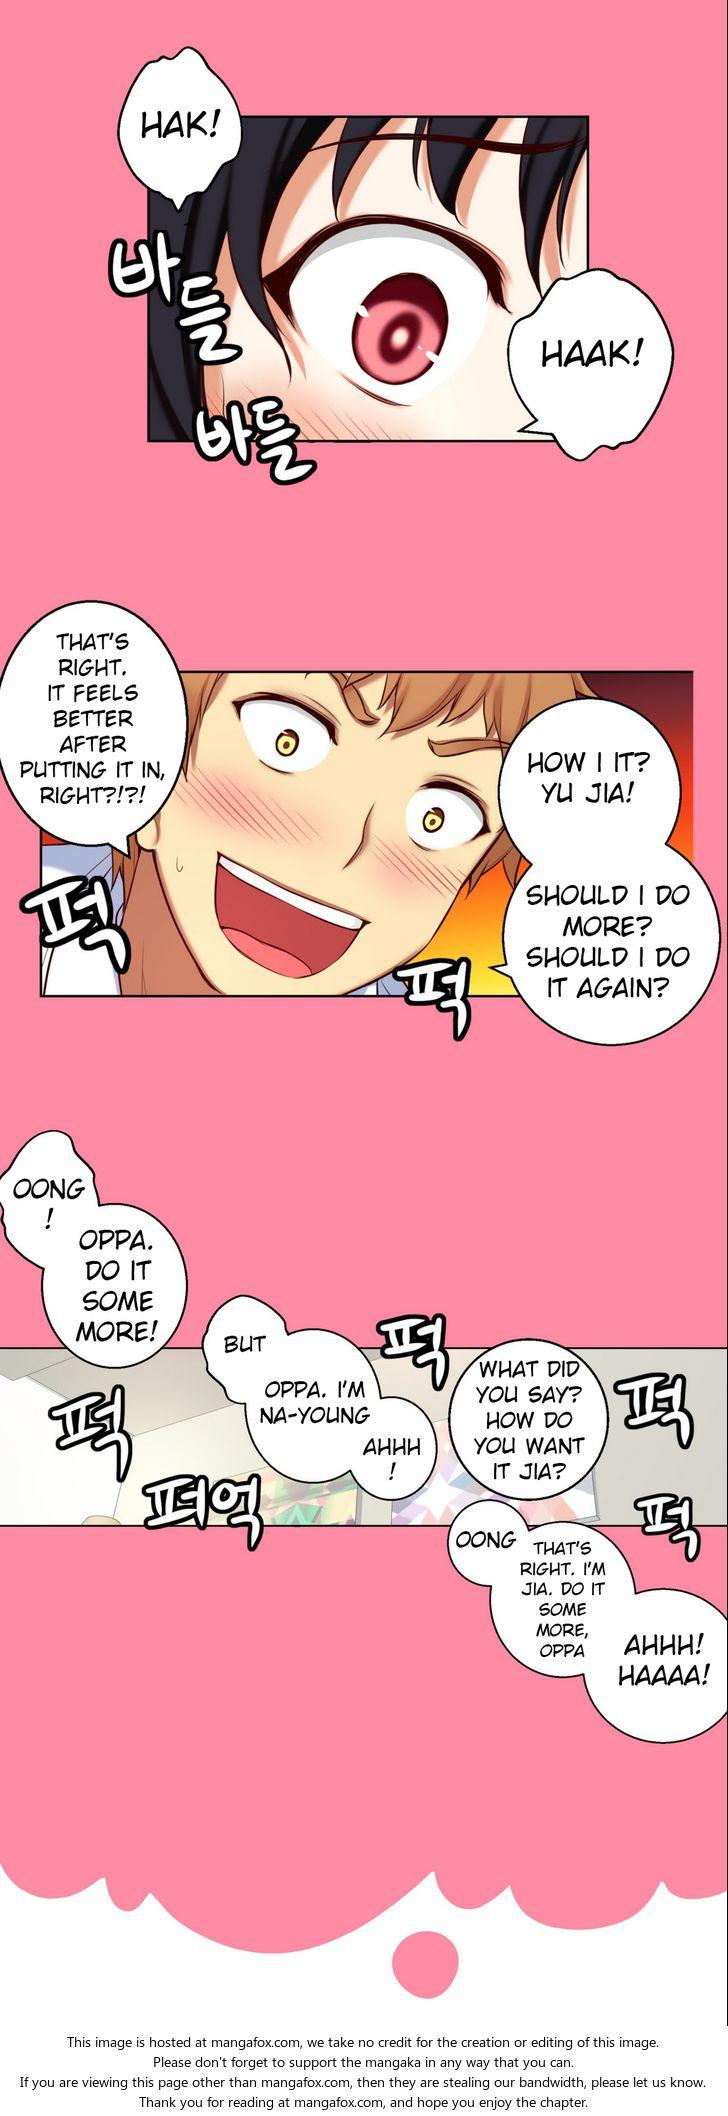 [Donggul Gom] She is Young (English) Part 1/2 497